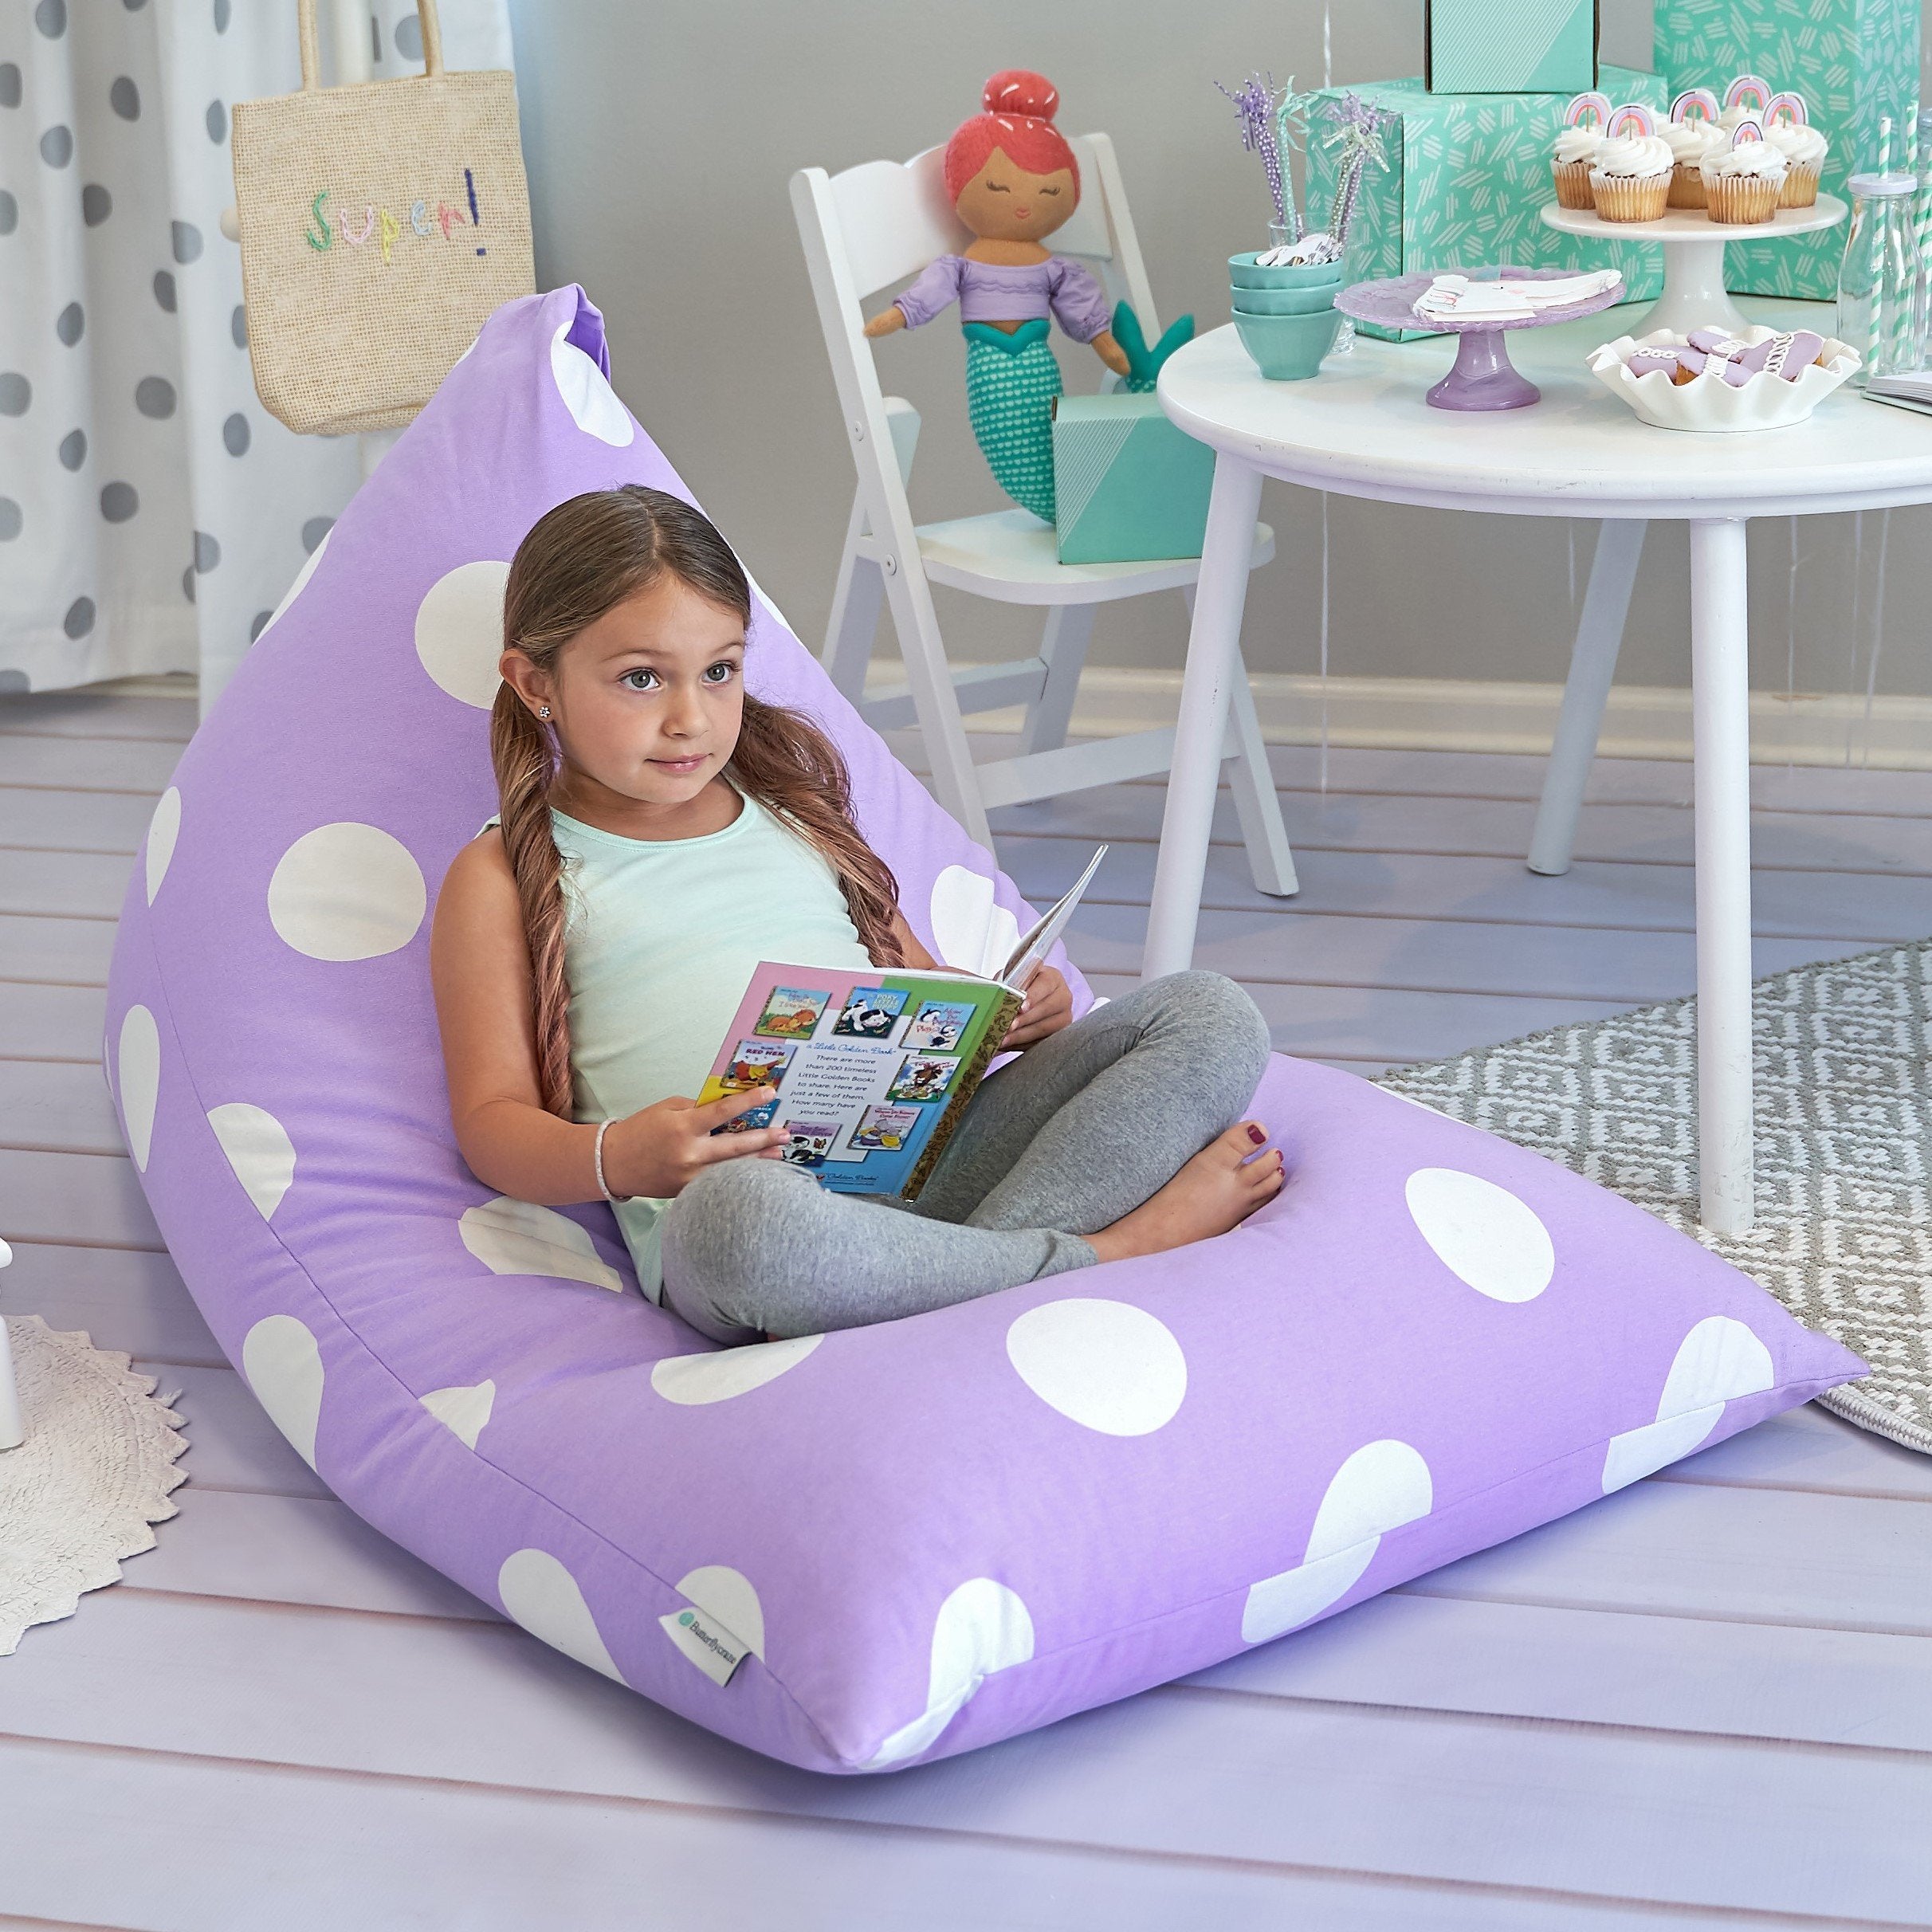 The 12 Best Bean Bag Chairs for Kids of 2023